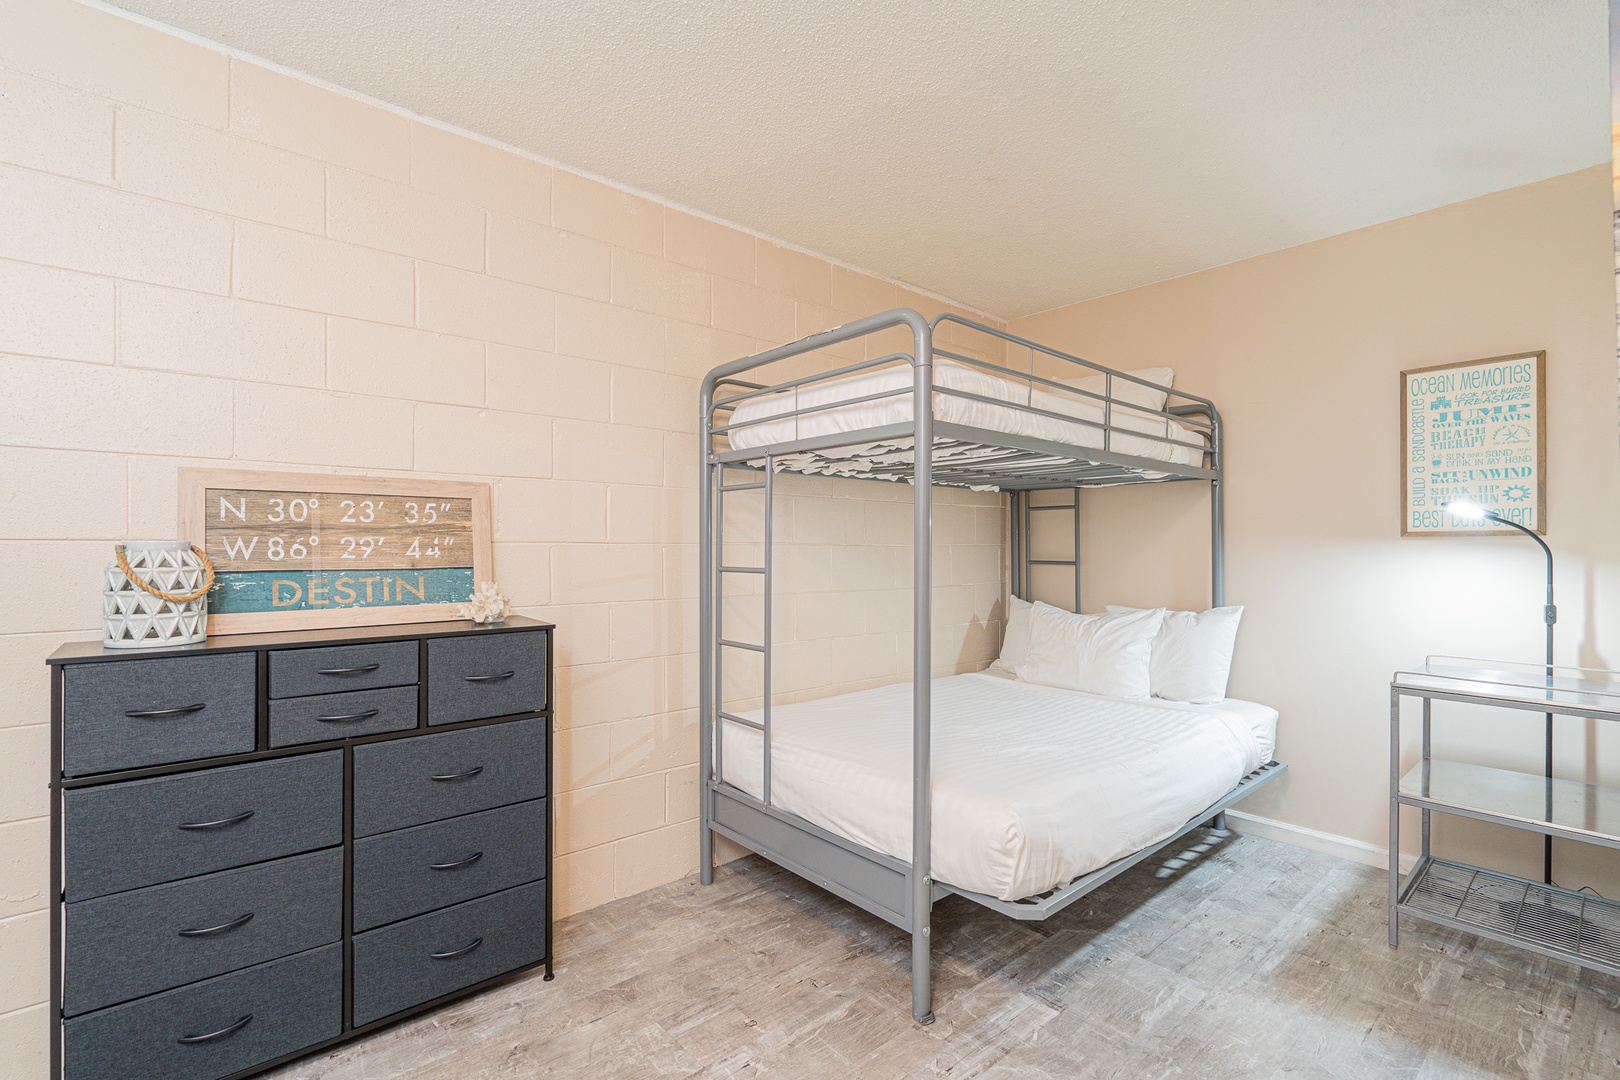 The game room sleeping area offers two twin-over-full bunkbeds & a Smart TV